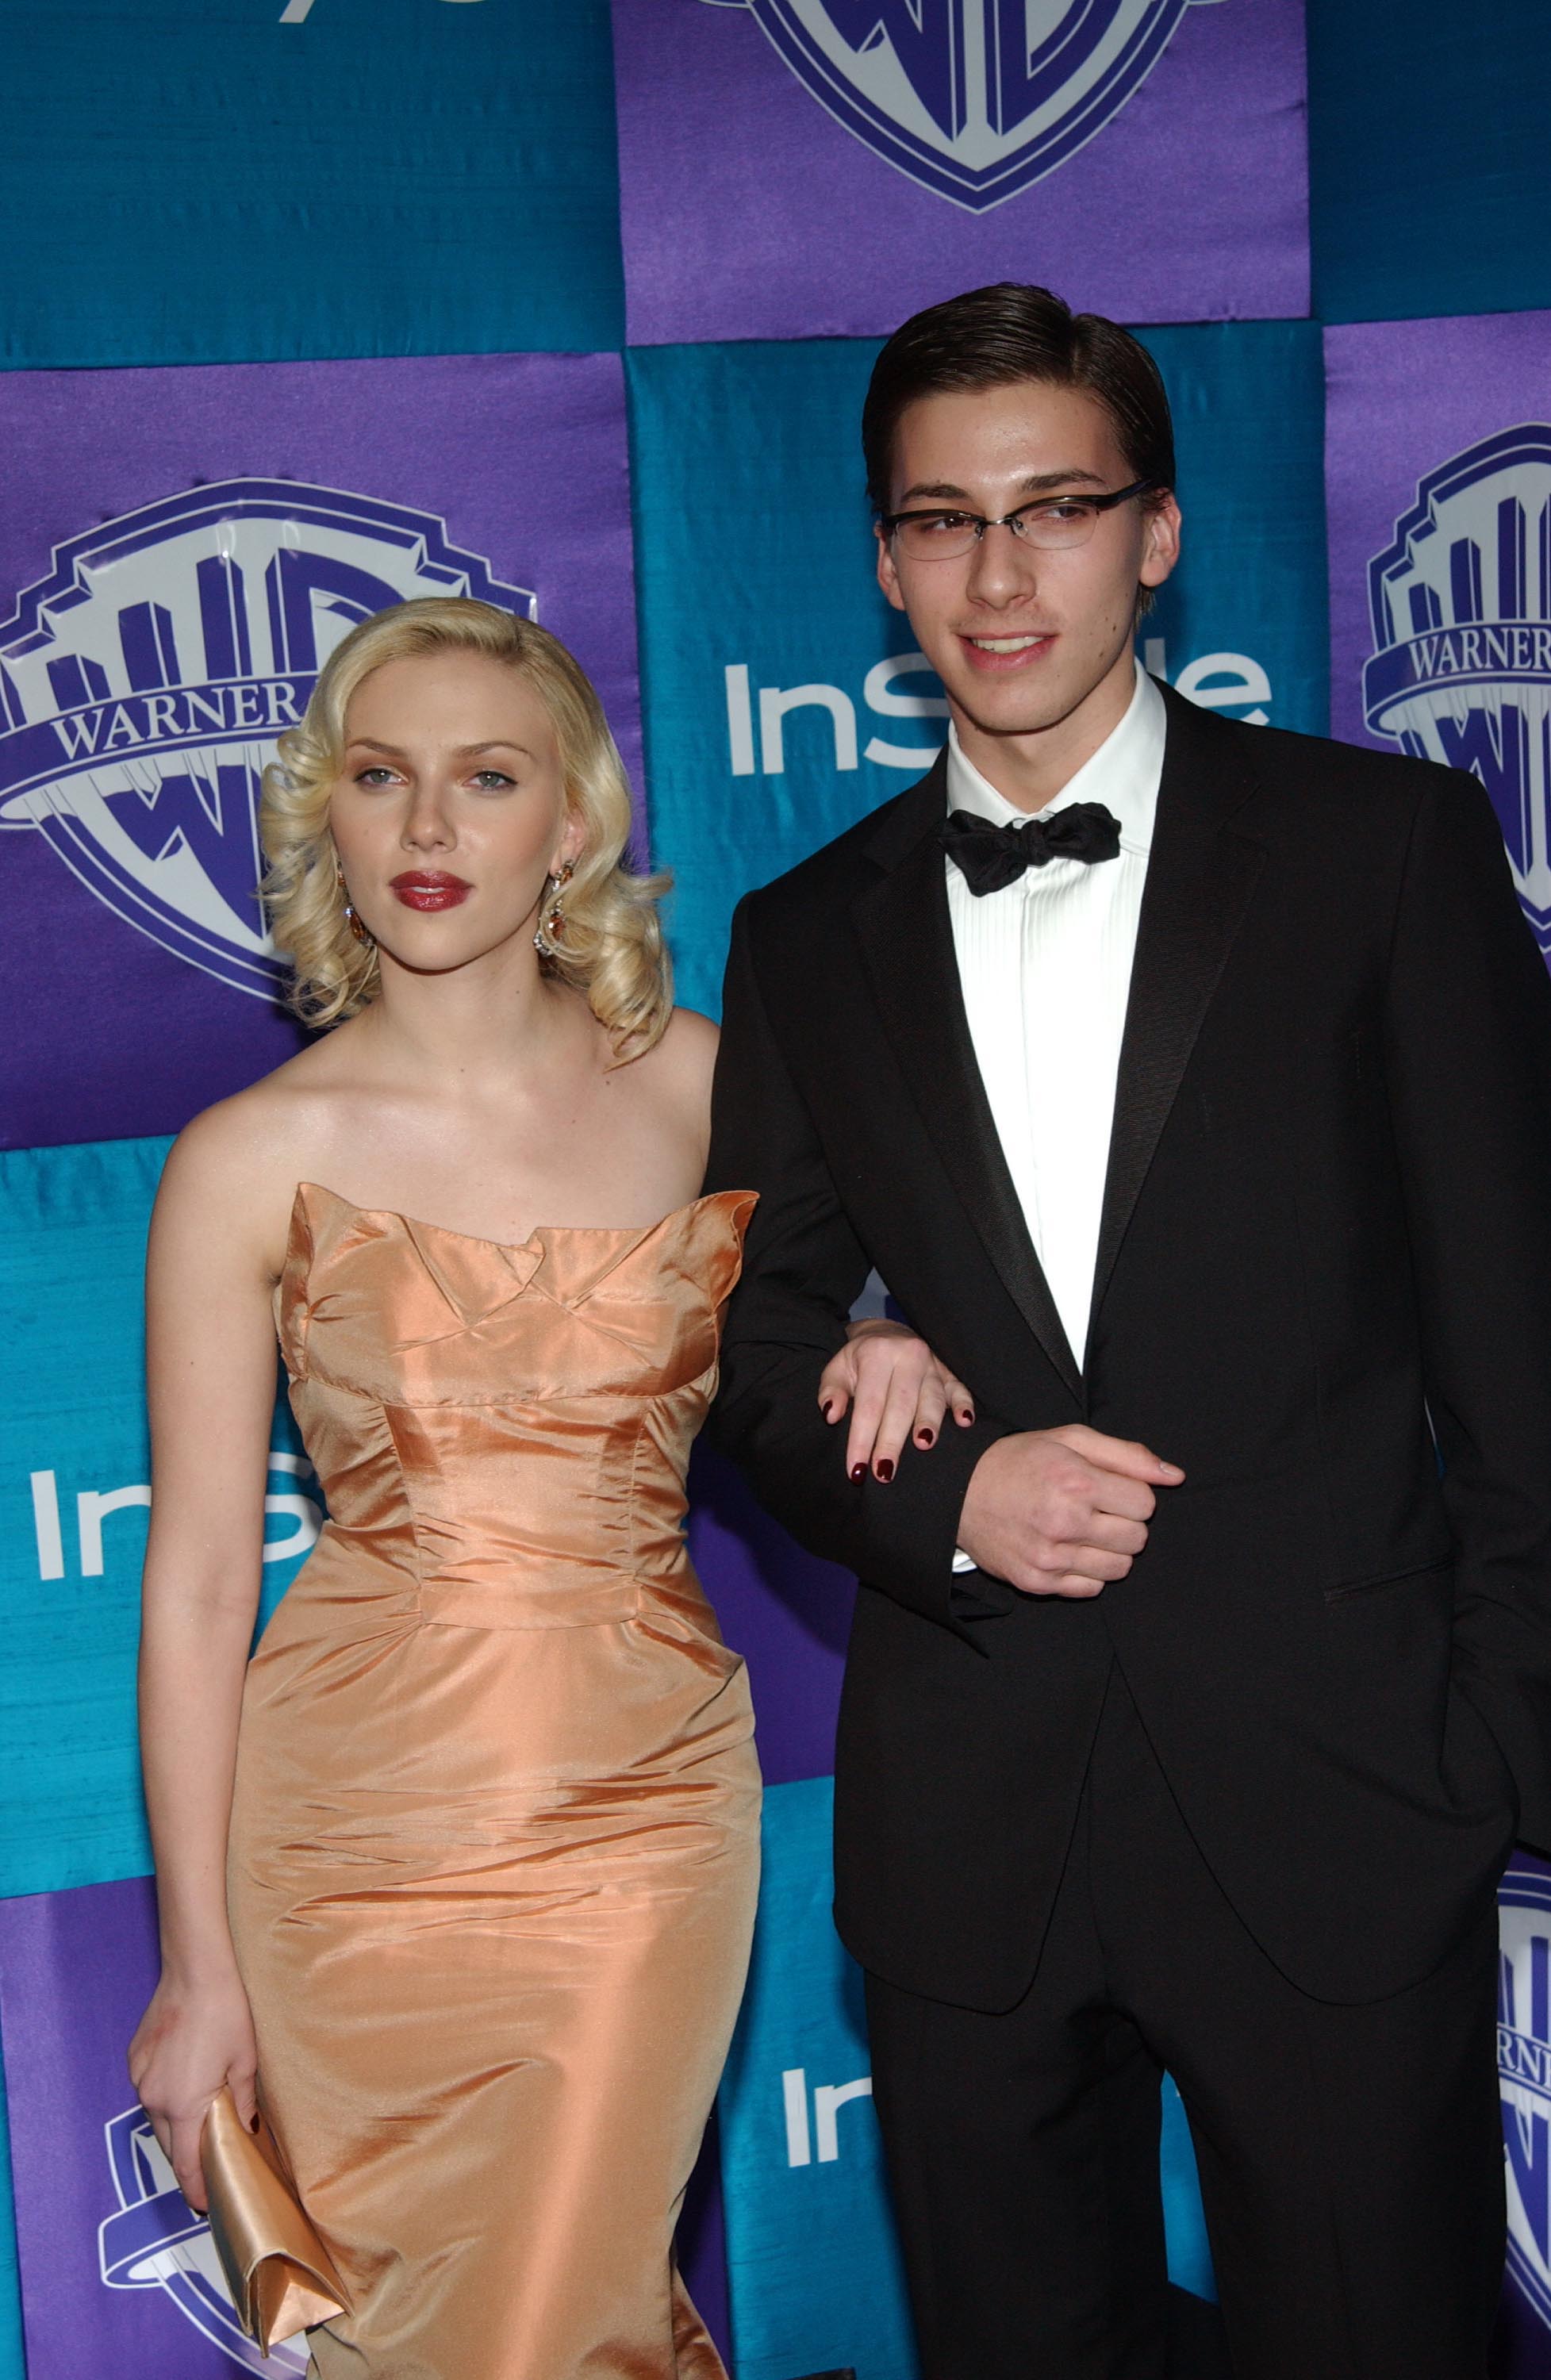 Scarlett and Hunter Johansson at the 2005 InStyle/Warner Bros. Golden Globes Afterparty in Beverly Hills, California. | Source: Getty Images